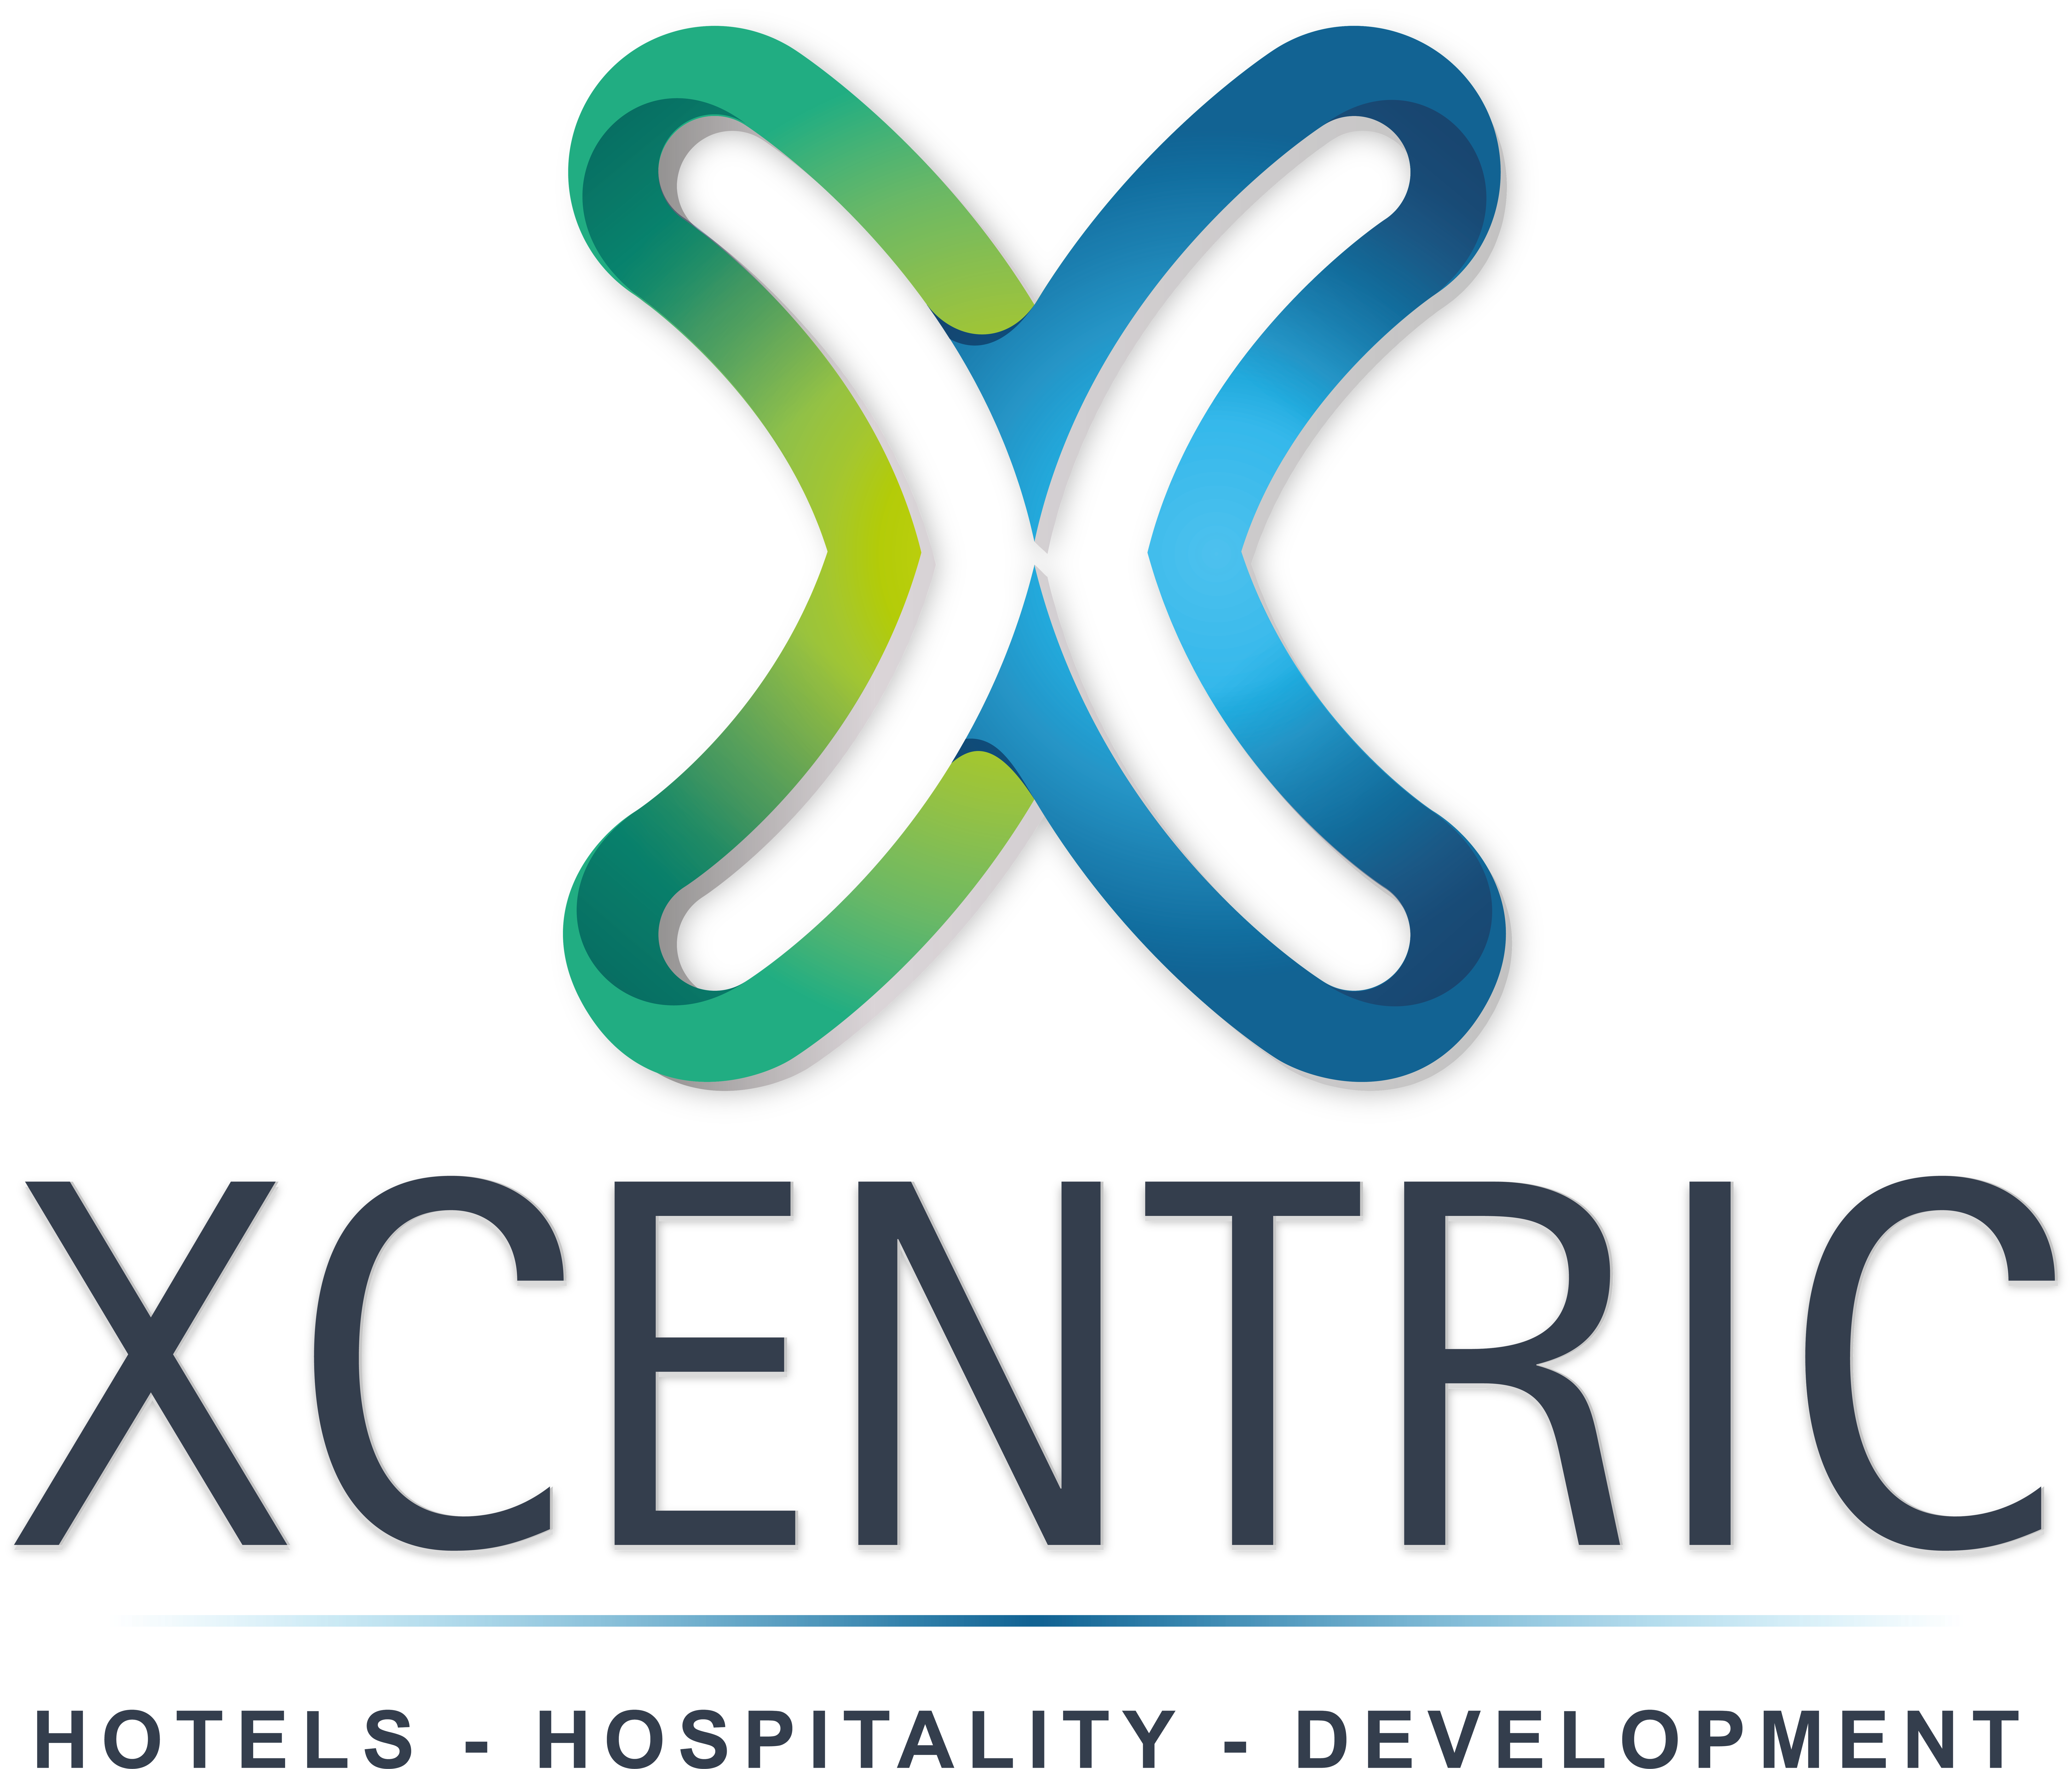 XCentric Hotels